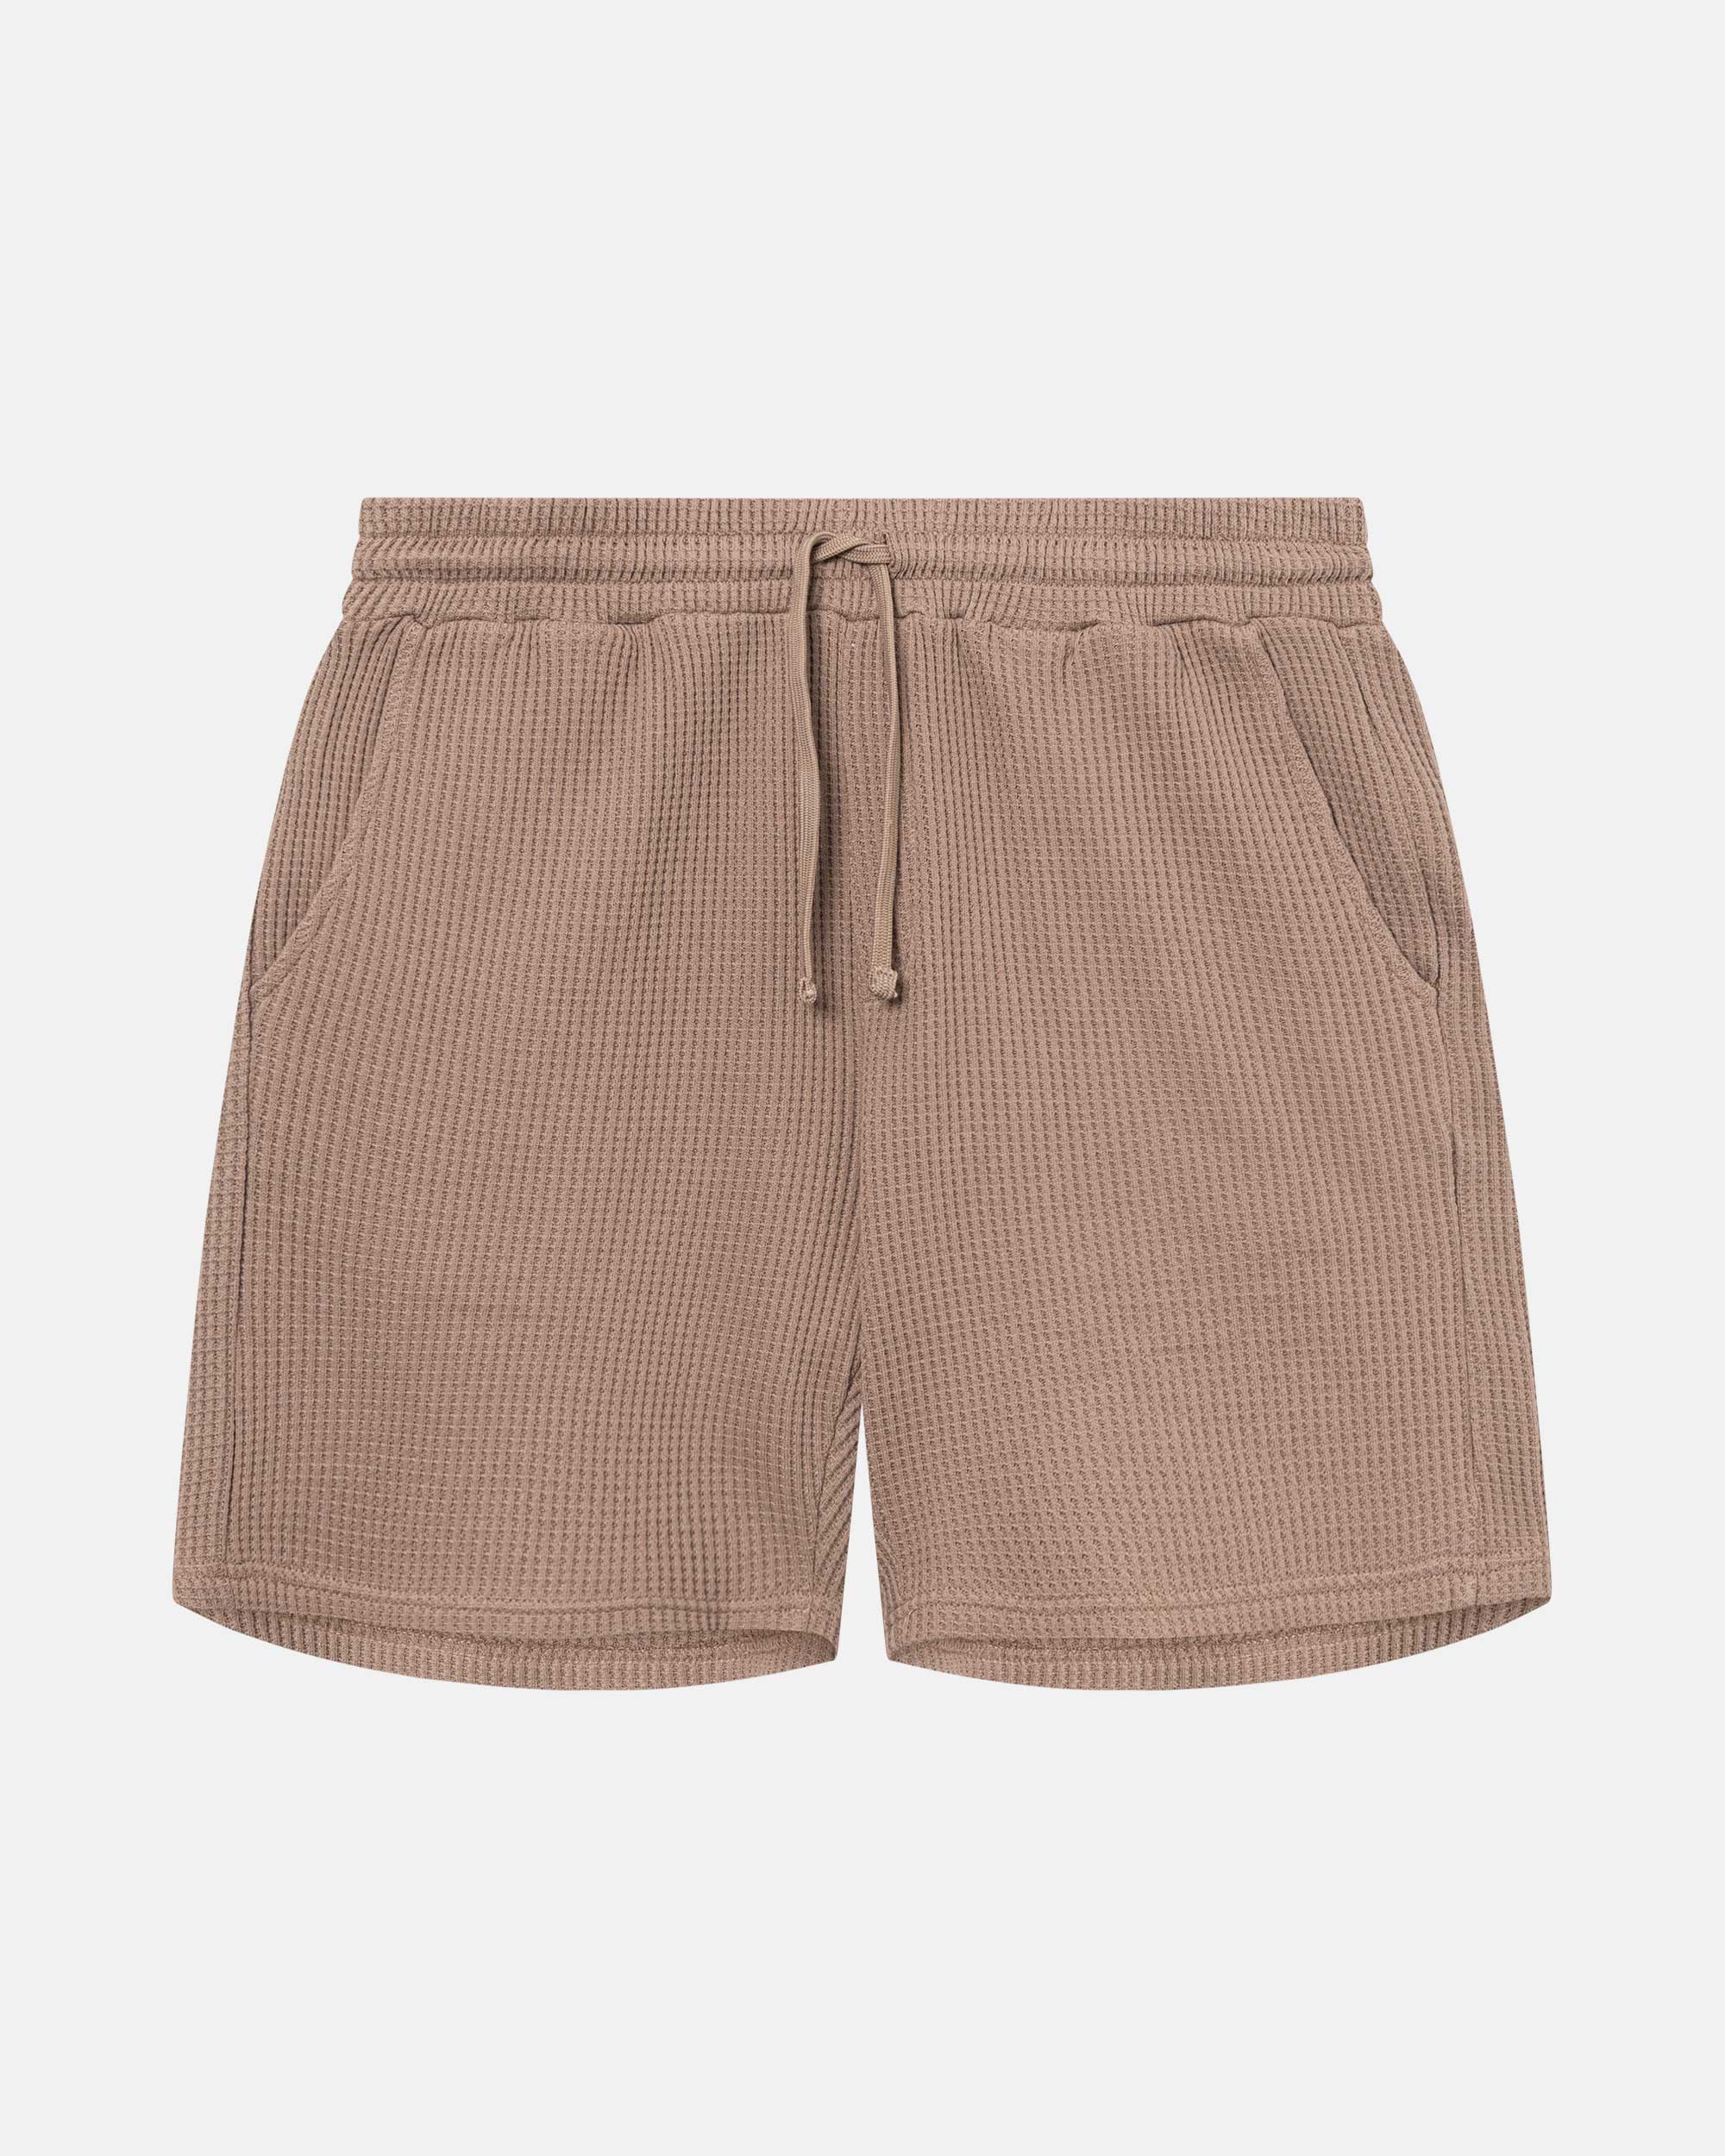 Brown waffle-patterned mid-length shorts with two front pockets and a drawstring.